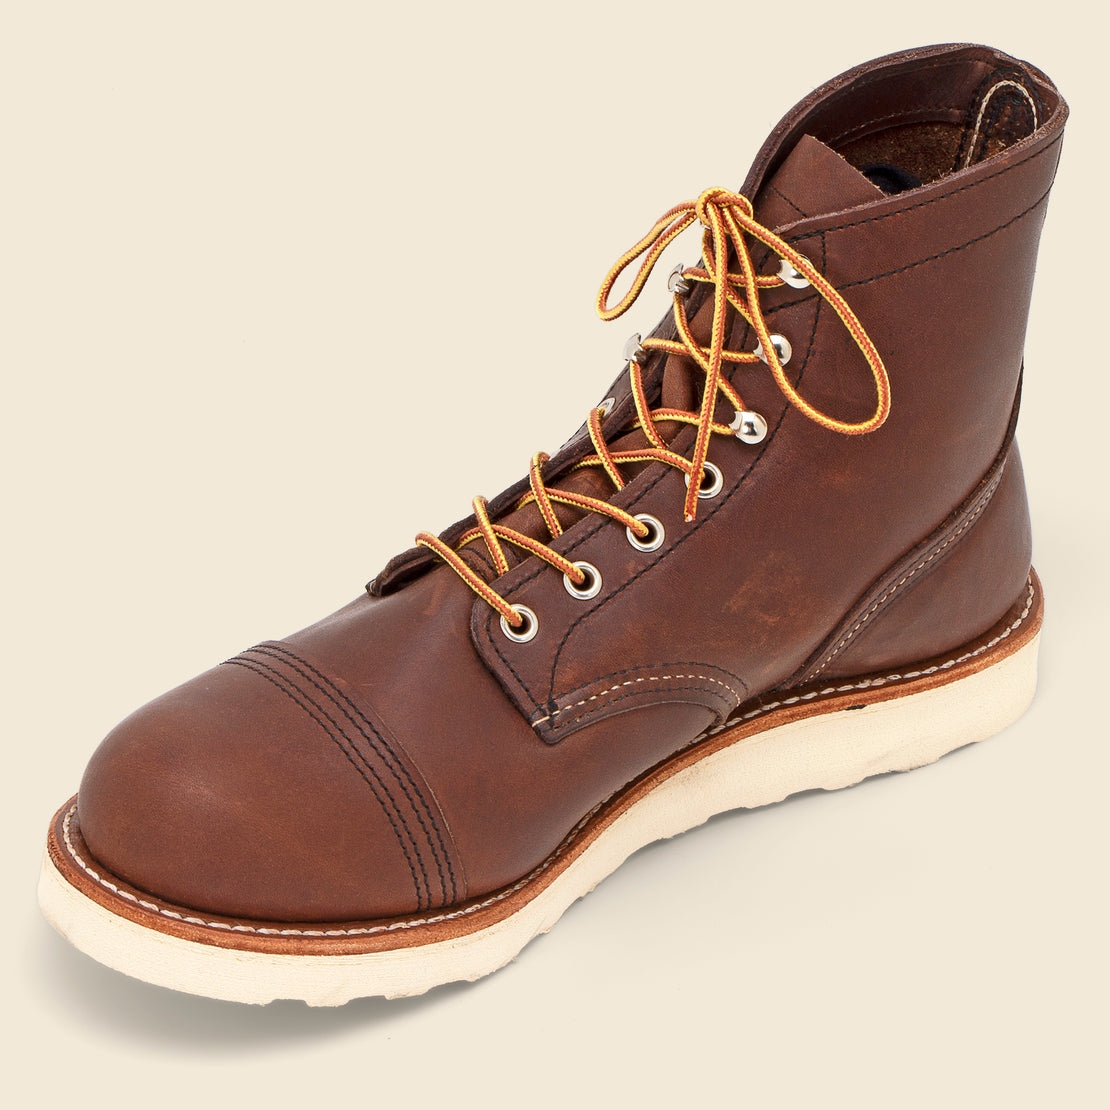 Iron Ranger Traction Tred No. 8088 - Amber - Red Wing - STAG Provisions - Shoes - Boots / Chukkas